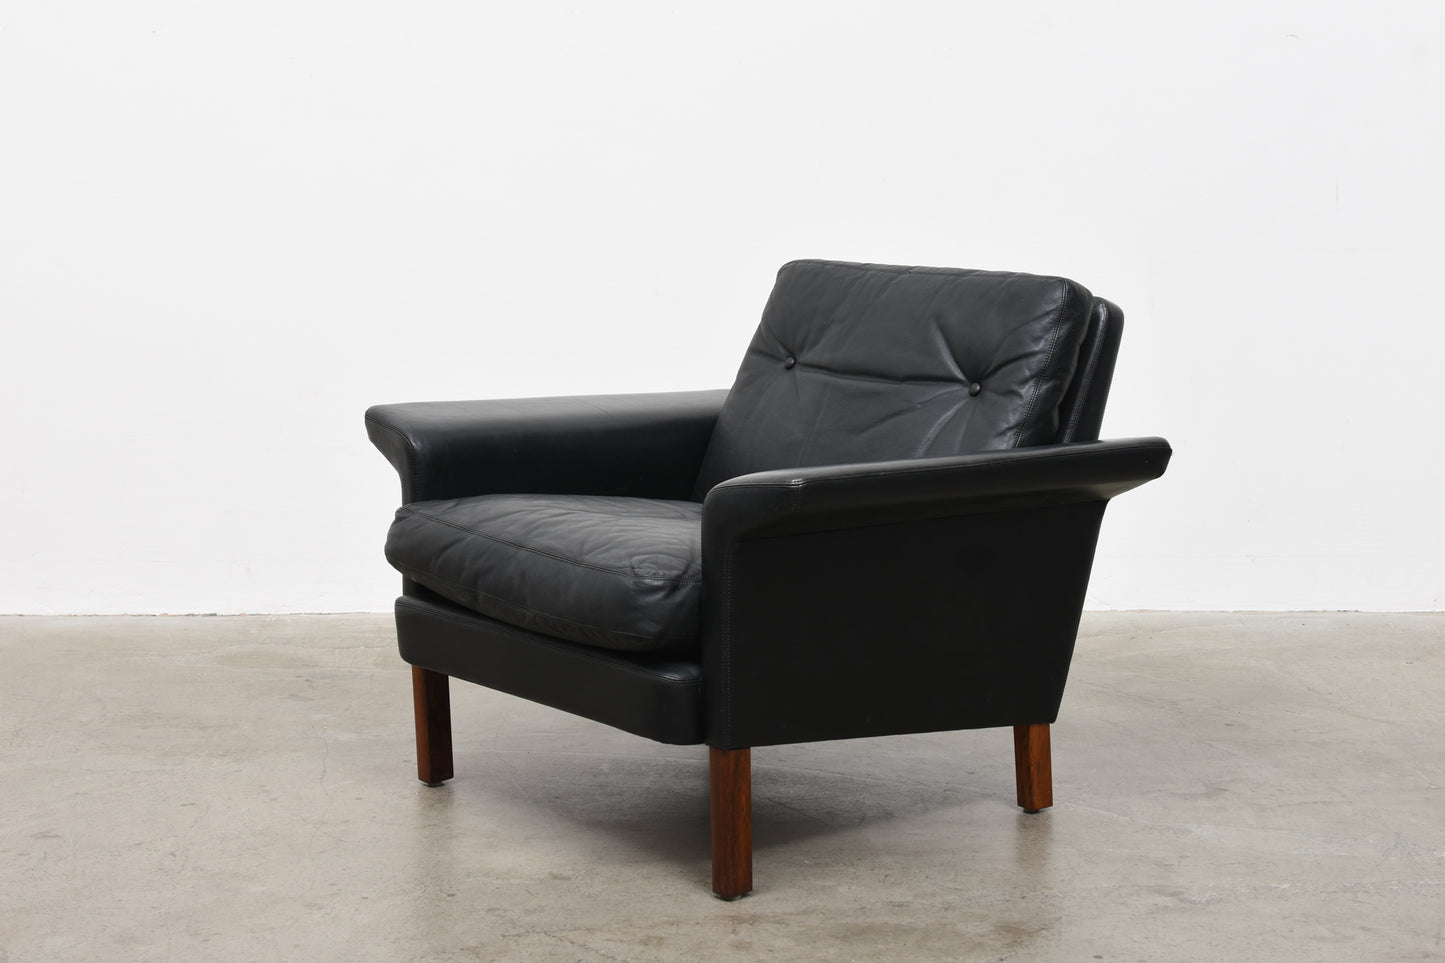 Low back leather lounger by Hans Olsen